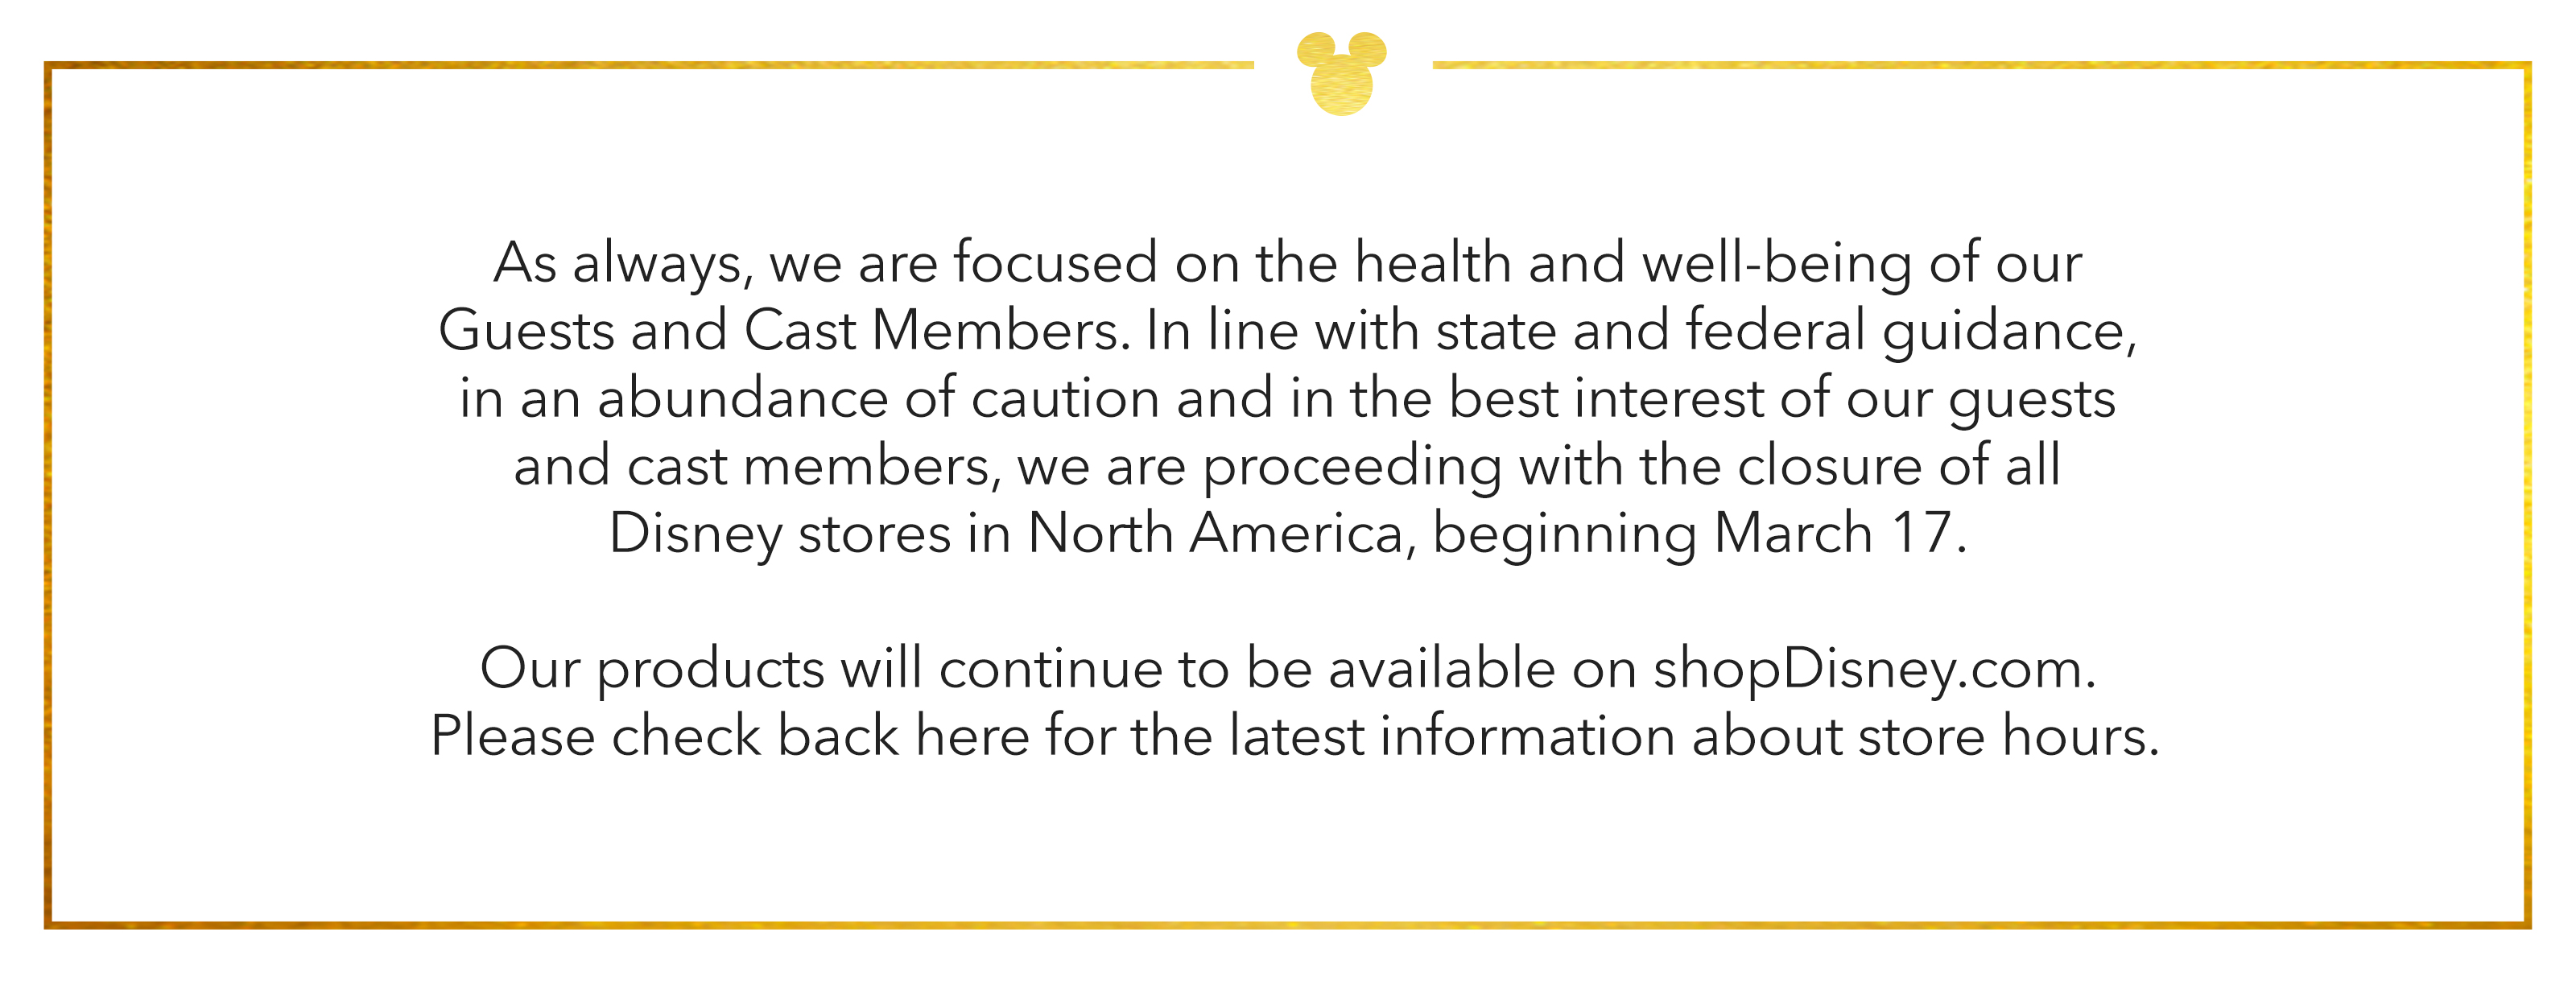 As always, we are focused on the health and well-being of our Guests and Cast Members. In line with the state and federal guidance, in an abundance of caution and in the best interest of our guests and cast members, we are proceeding with the closure of all Disney stores in North America, beginning March 17.
					Our products will continue to be available on shopDisney.com. Please check back here for the latest information about store hours.